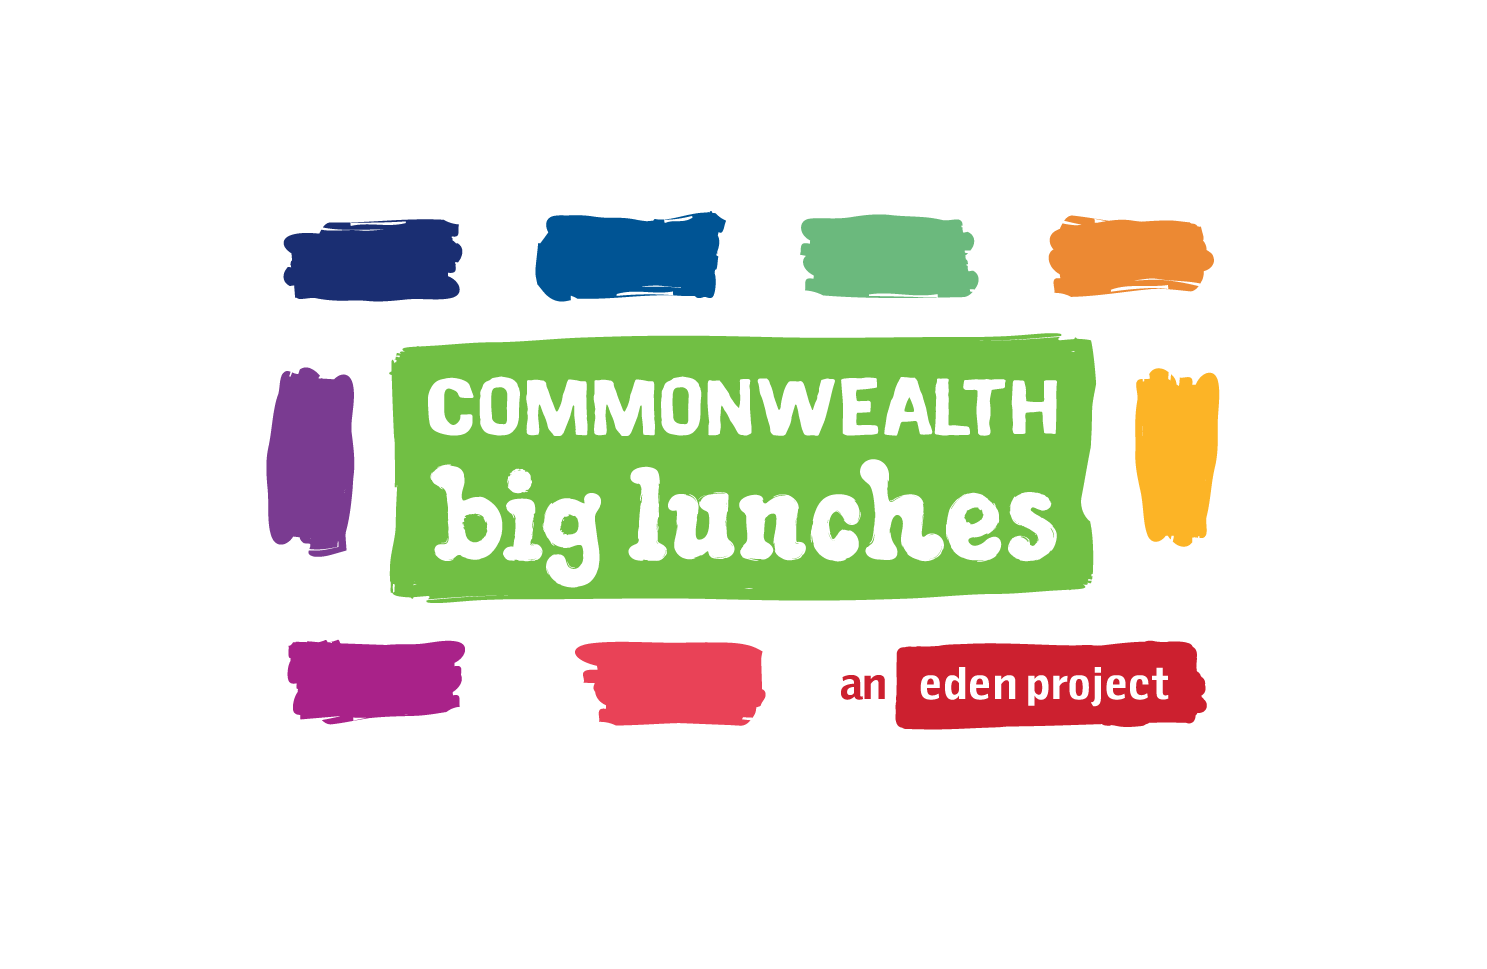 Commonwealth big lunches